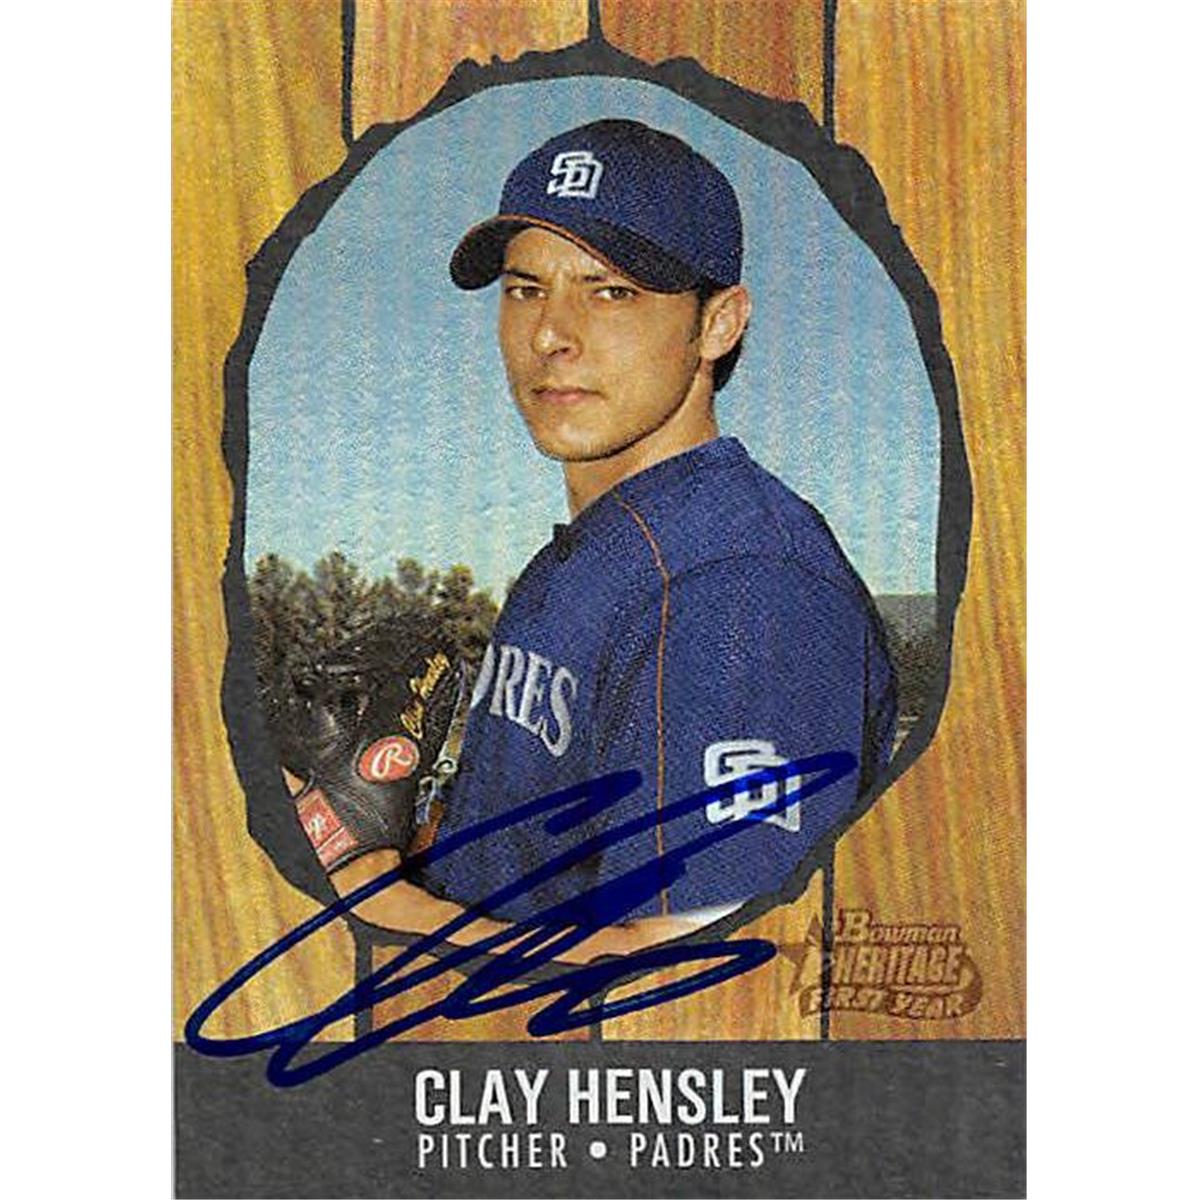 344030 Clay Hensley Autographed Baseball Card - San Diego Padres FT 2003 Bowman Heritage First Year No. 229 -  Autograph Warehouse